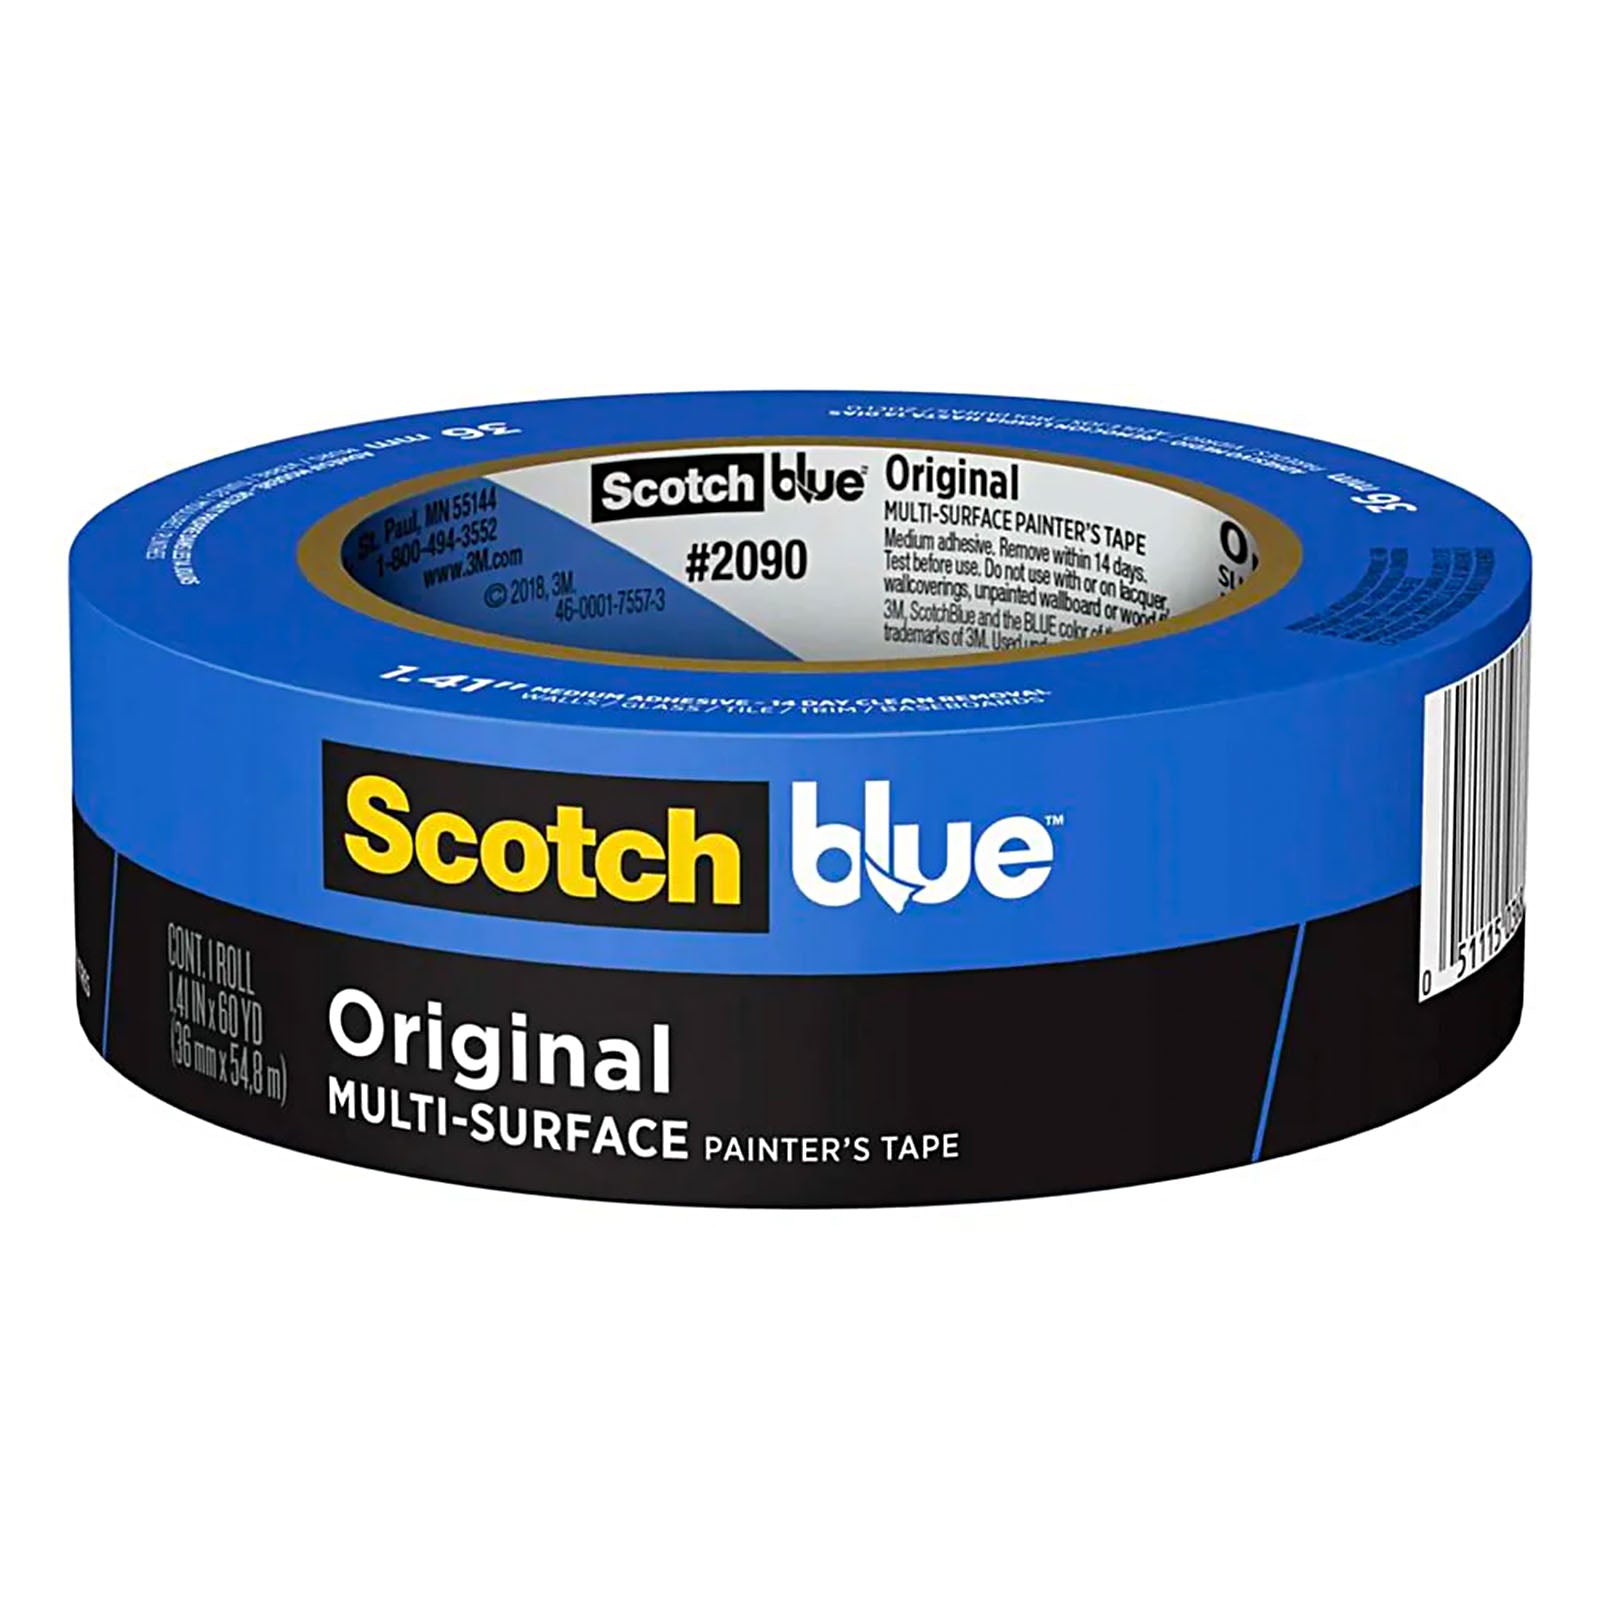 ScotchBlue Sharp Lines Multi-Surface 3-Pack 1.41-in x 60 Yard(s